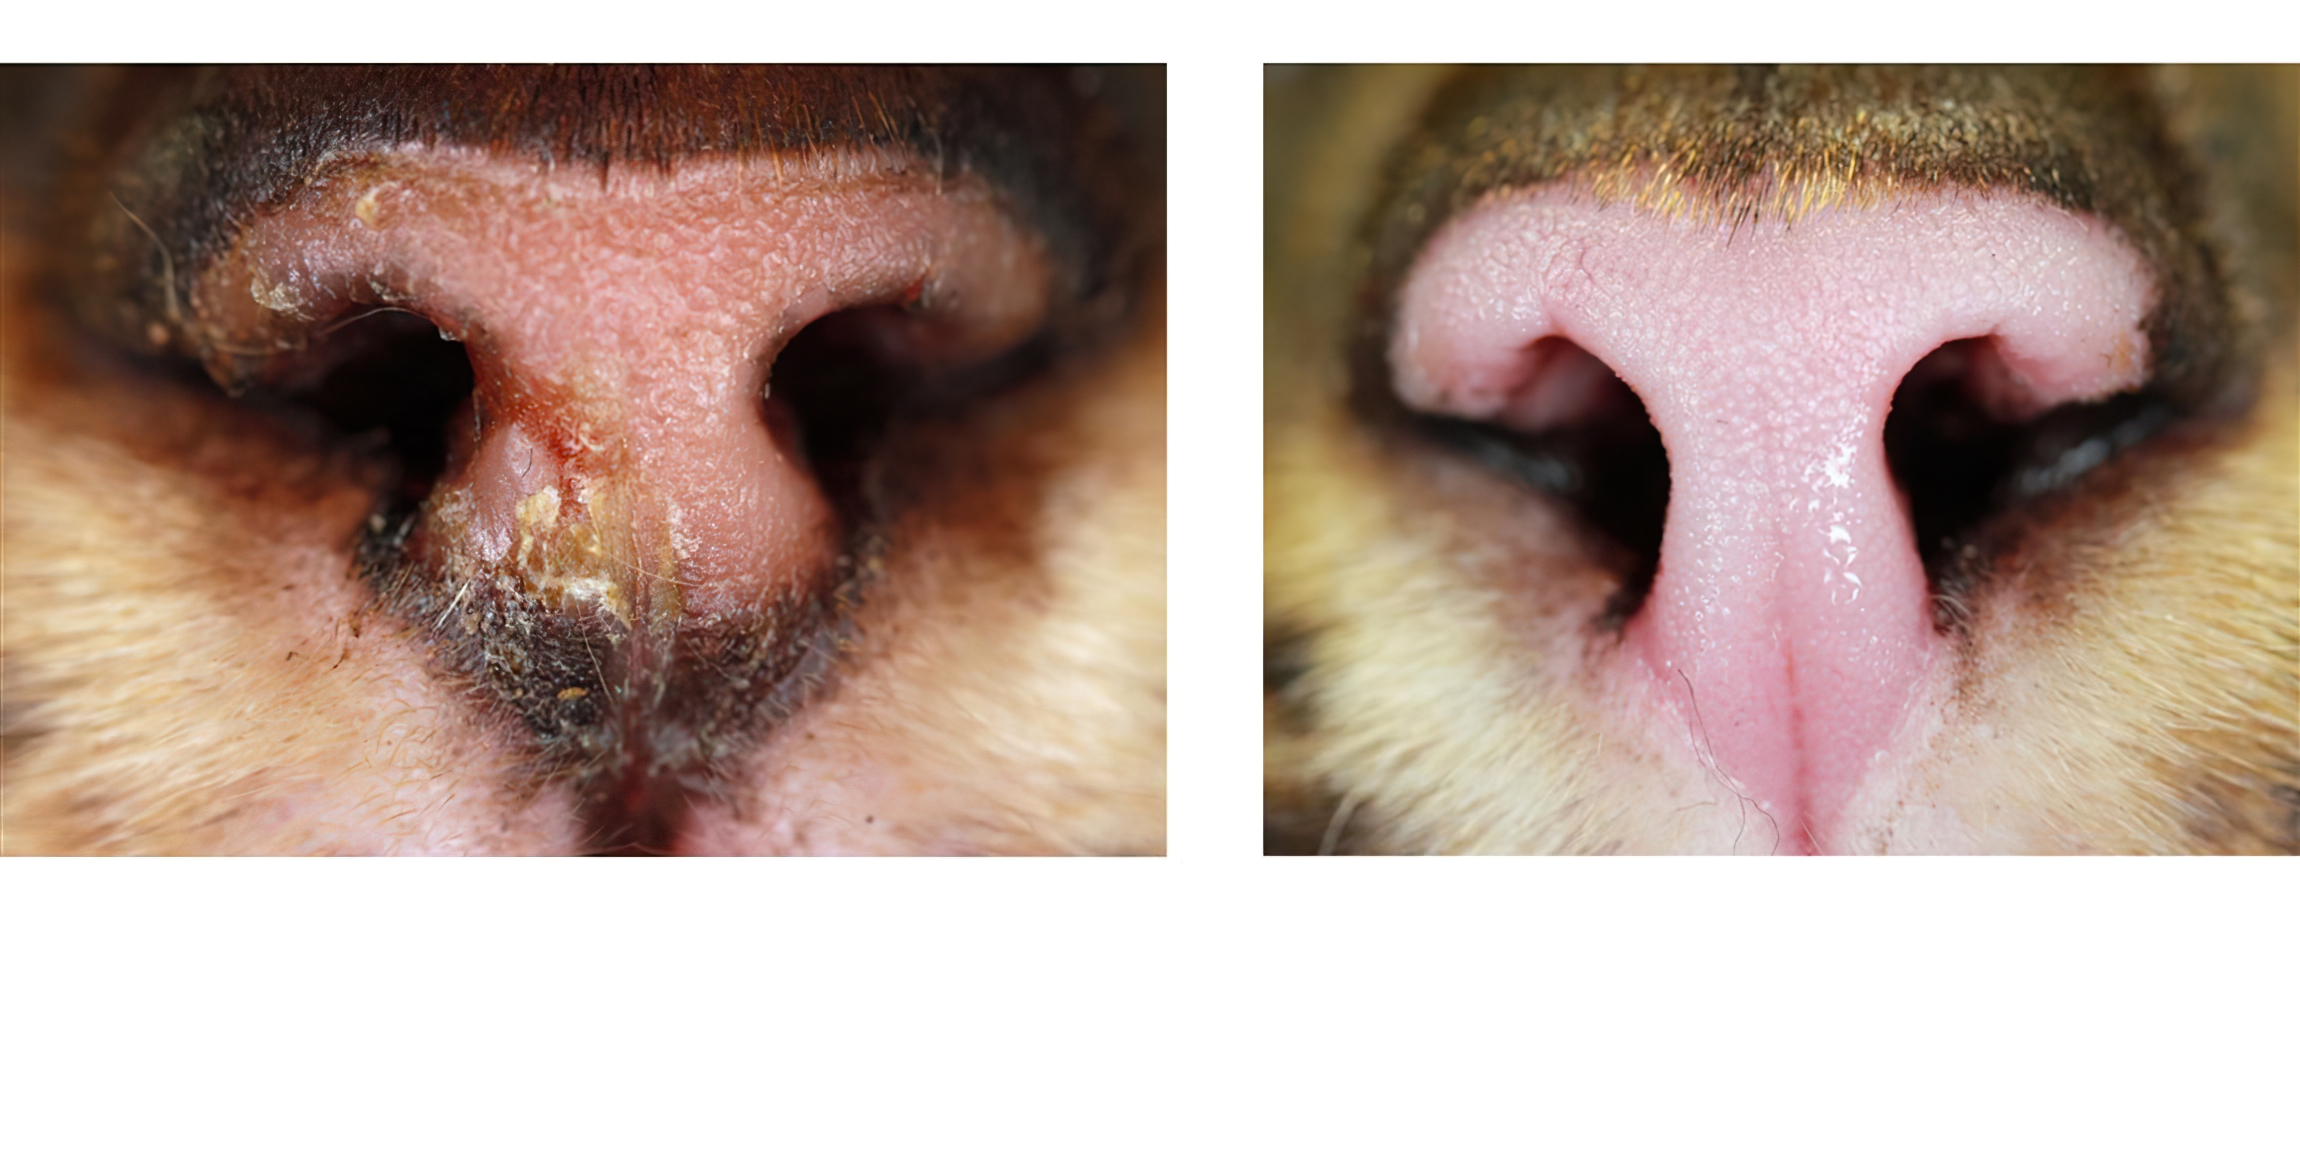 Feline Pemphigus Foliaceus: on immediate Diagnosis & after 15 months of Topical Treatment only, Bengal Cat